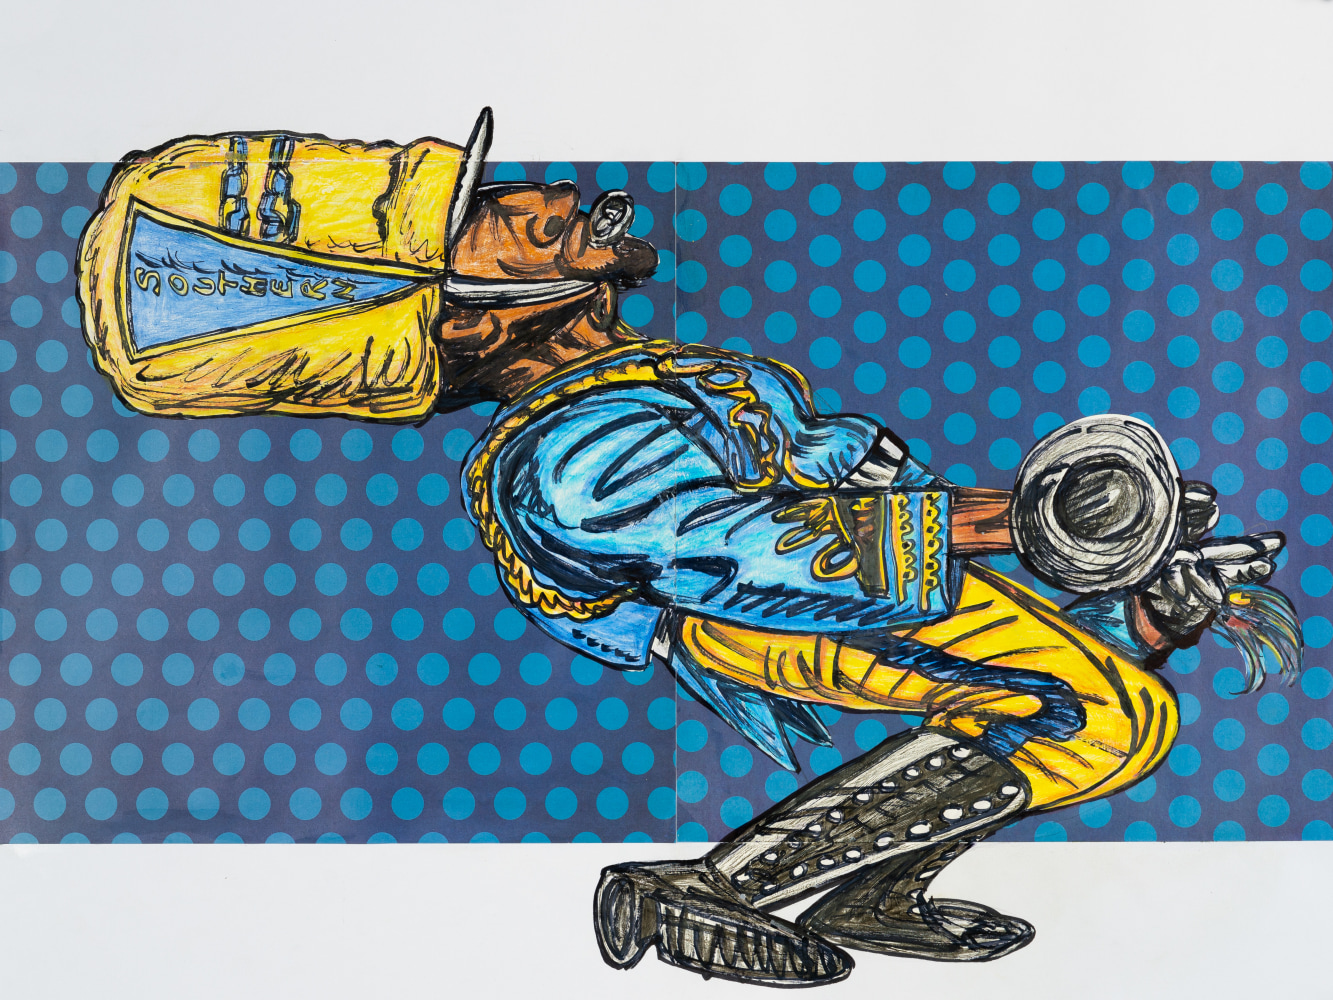 Keith Duncan
Southern University Drum Major 7, 2020
Colored pencil and marker on paper
18 x 24 inches